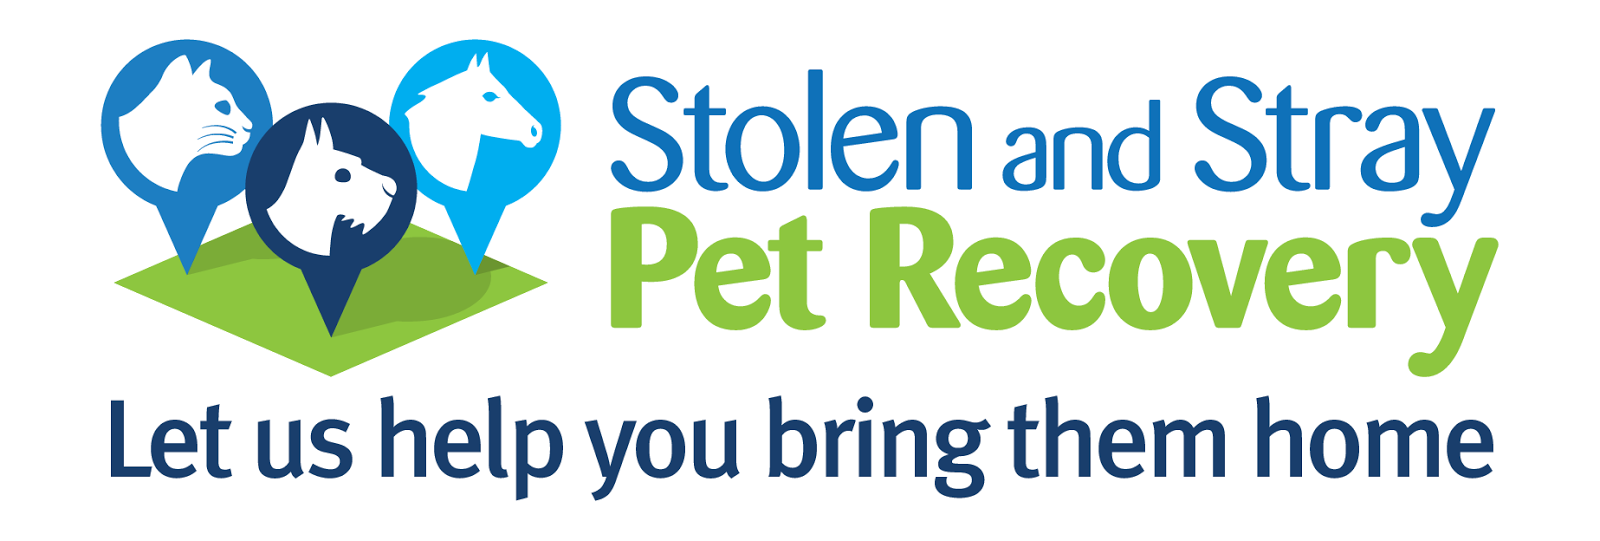 Stolen and Stray Pet Recovery